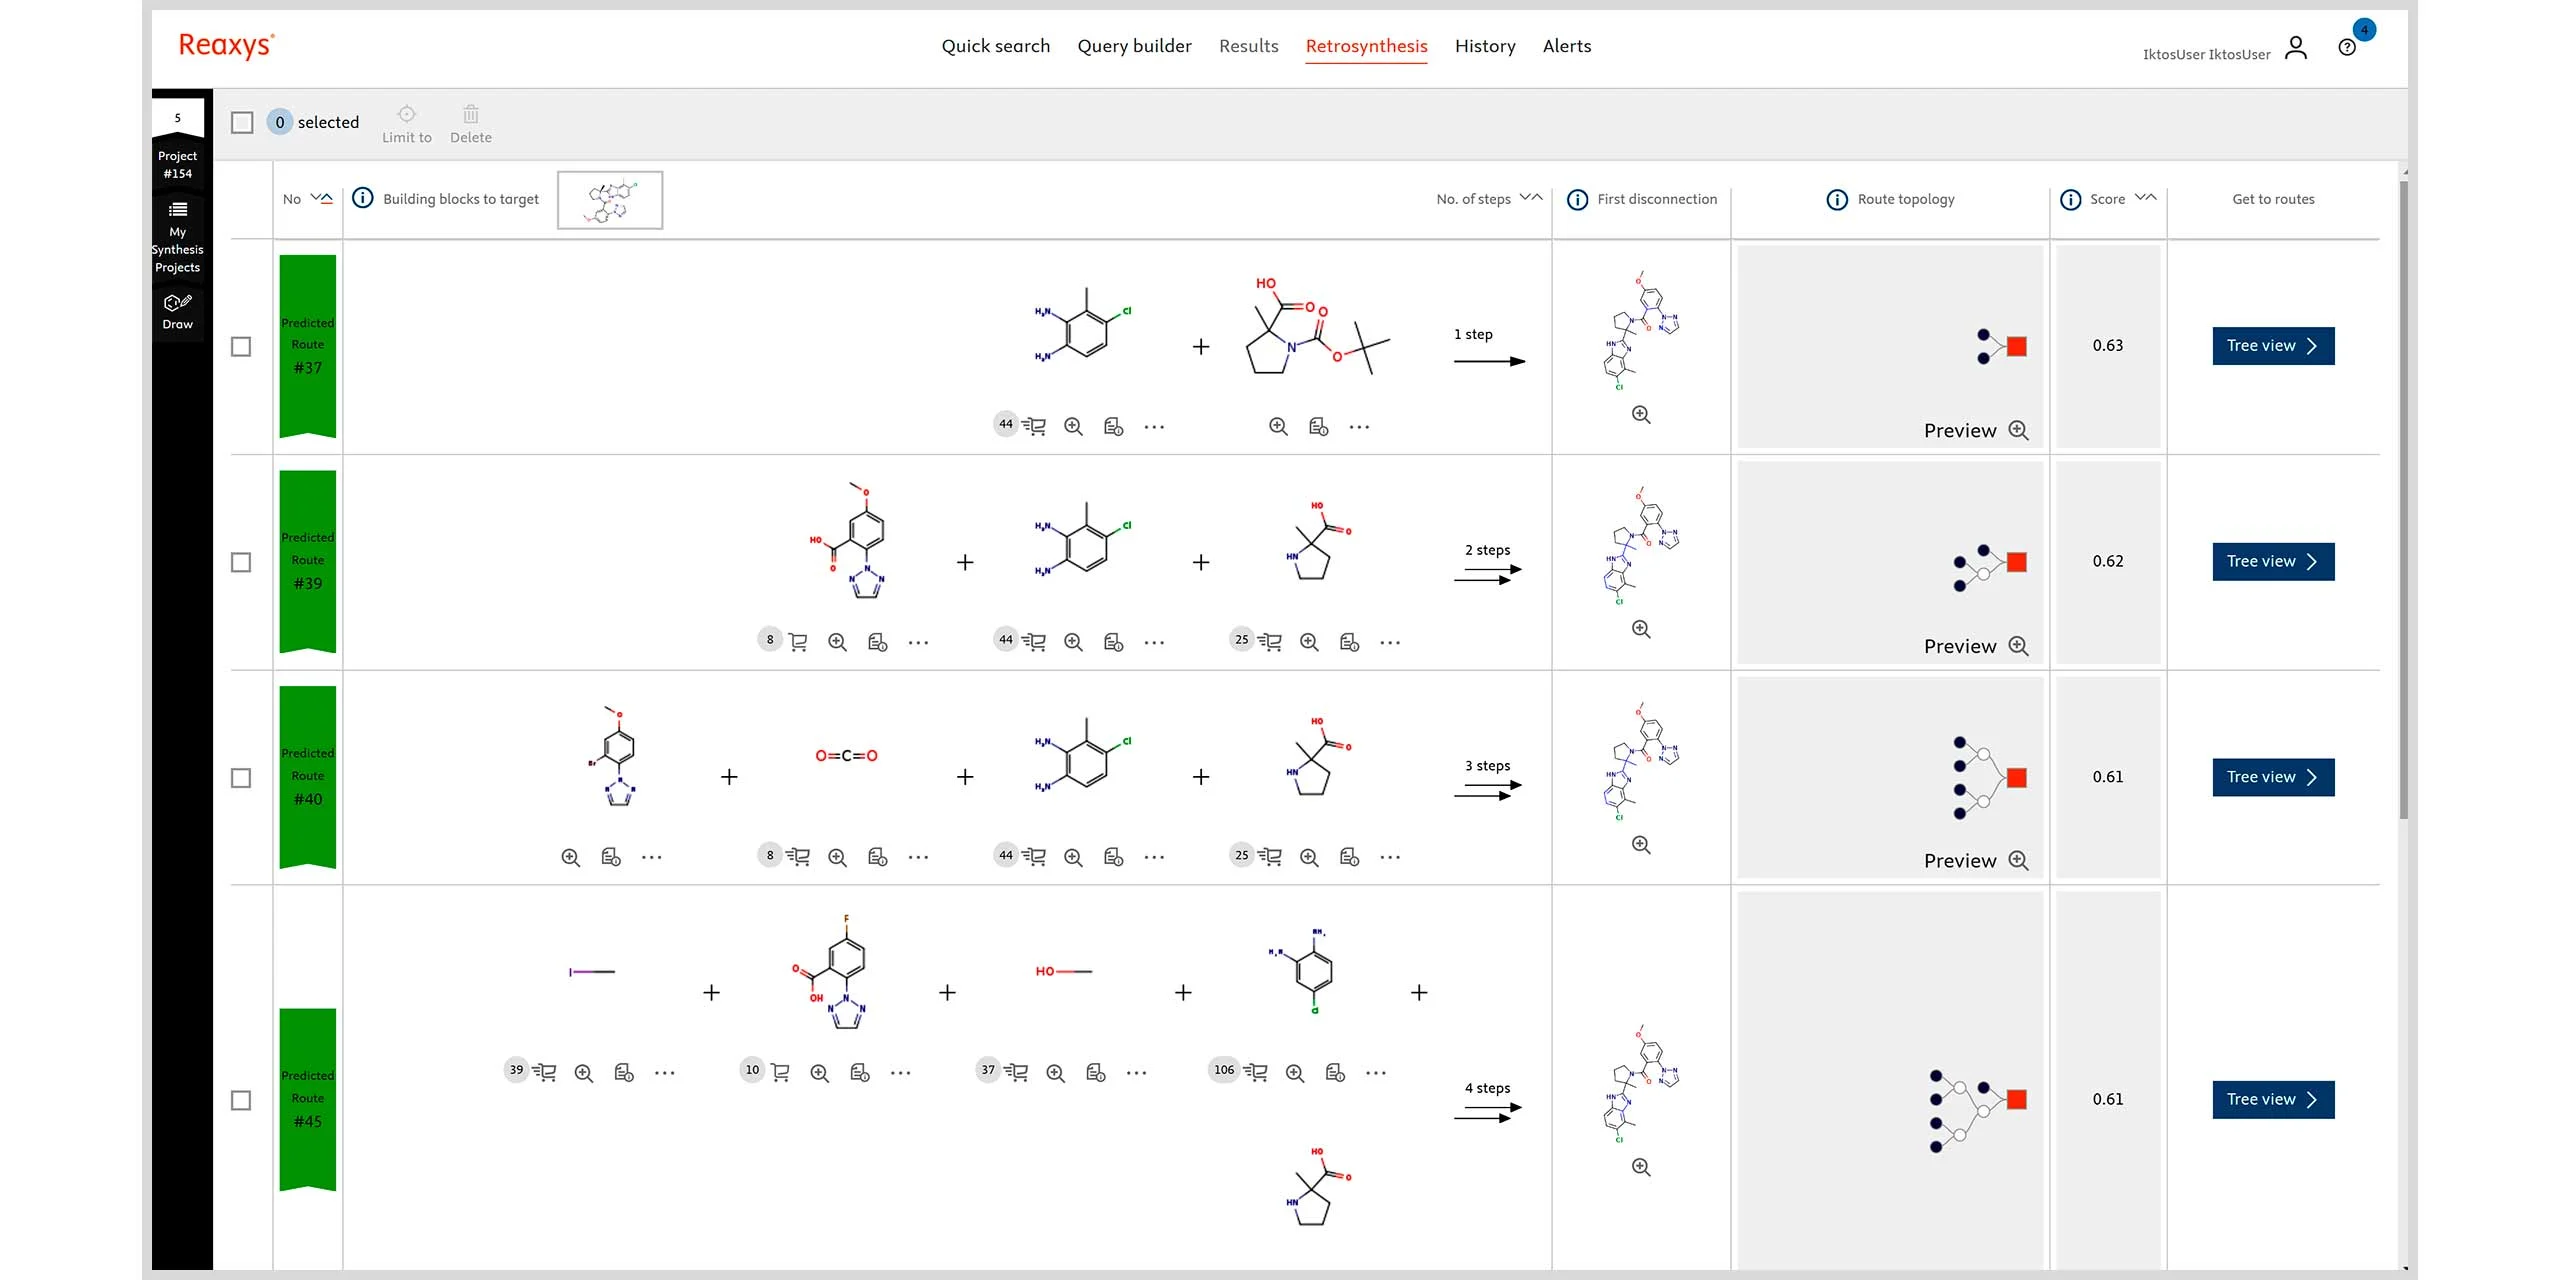 Screenshot of the Retrosynthesis section in Reaxys showing various routes for a molecule